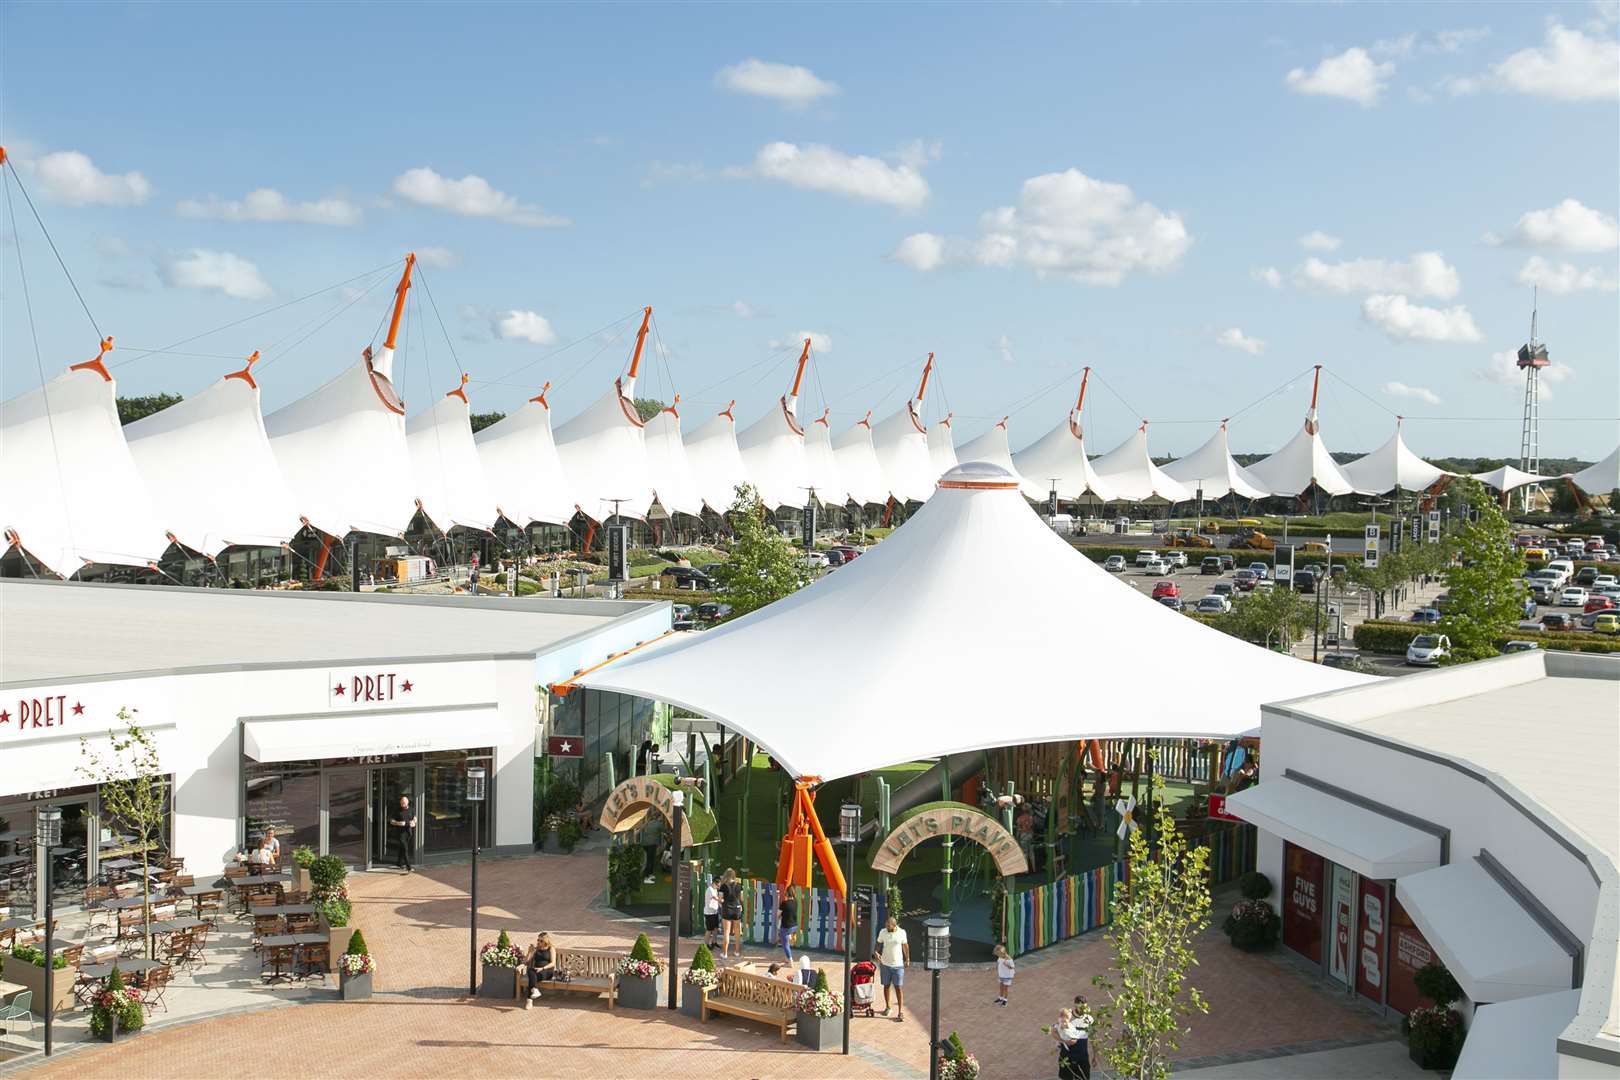 The Designer Outlet reopens tomorrow, but not all brands will be welcoming customers again